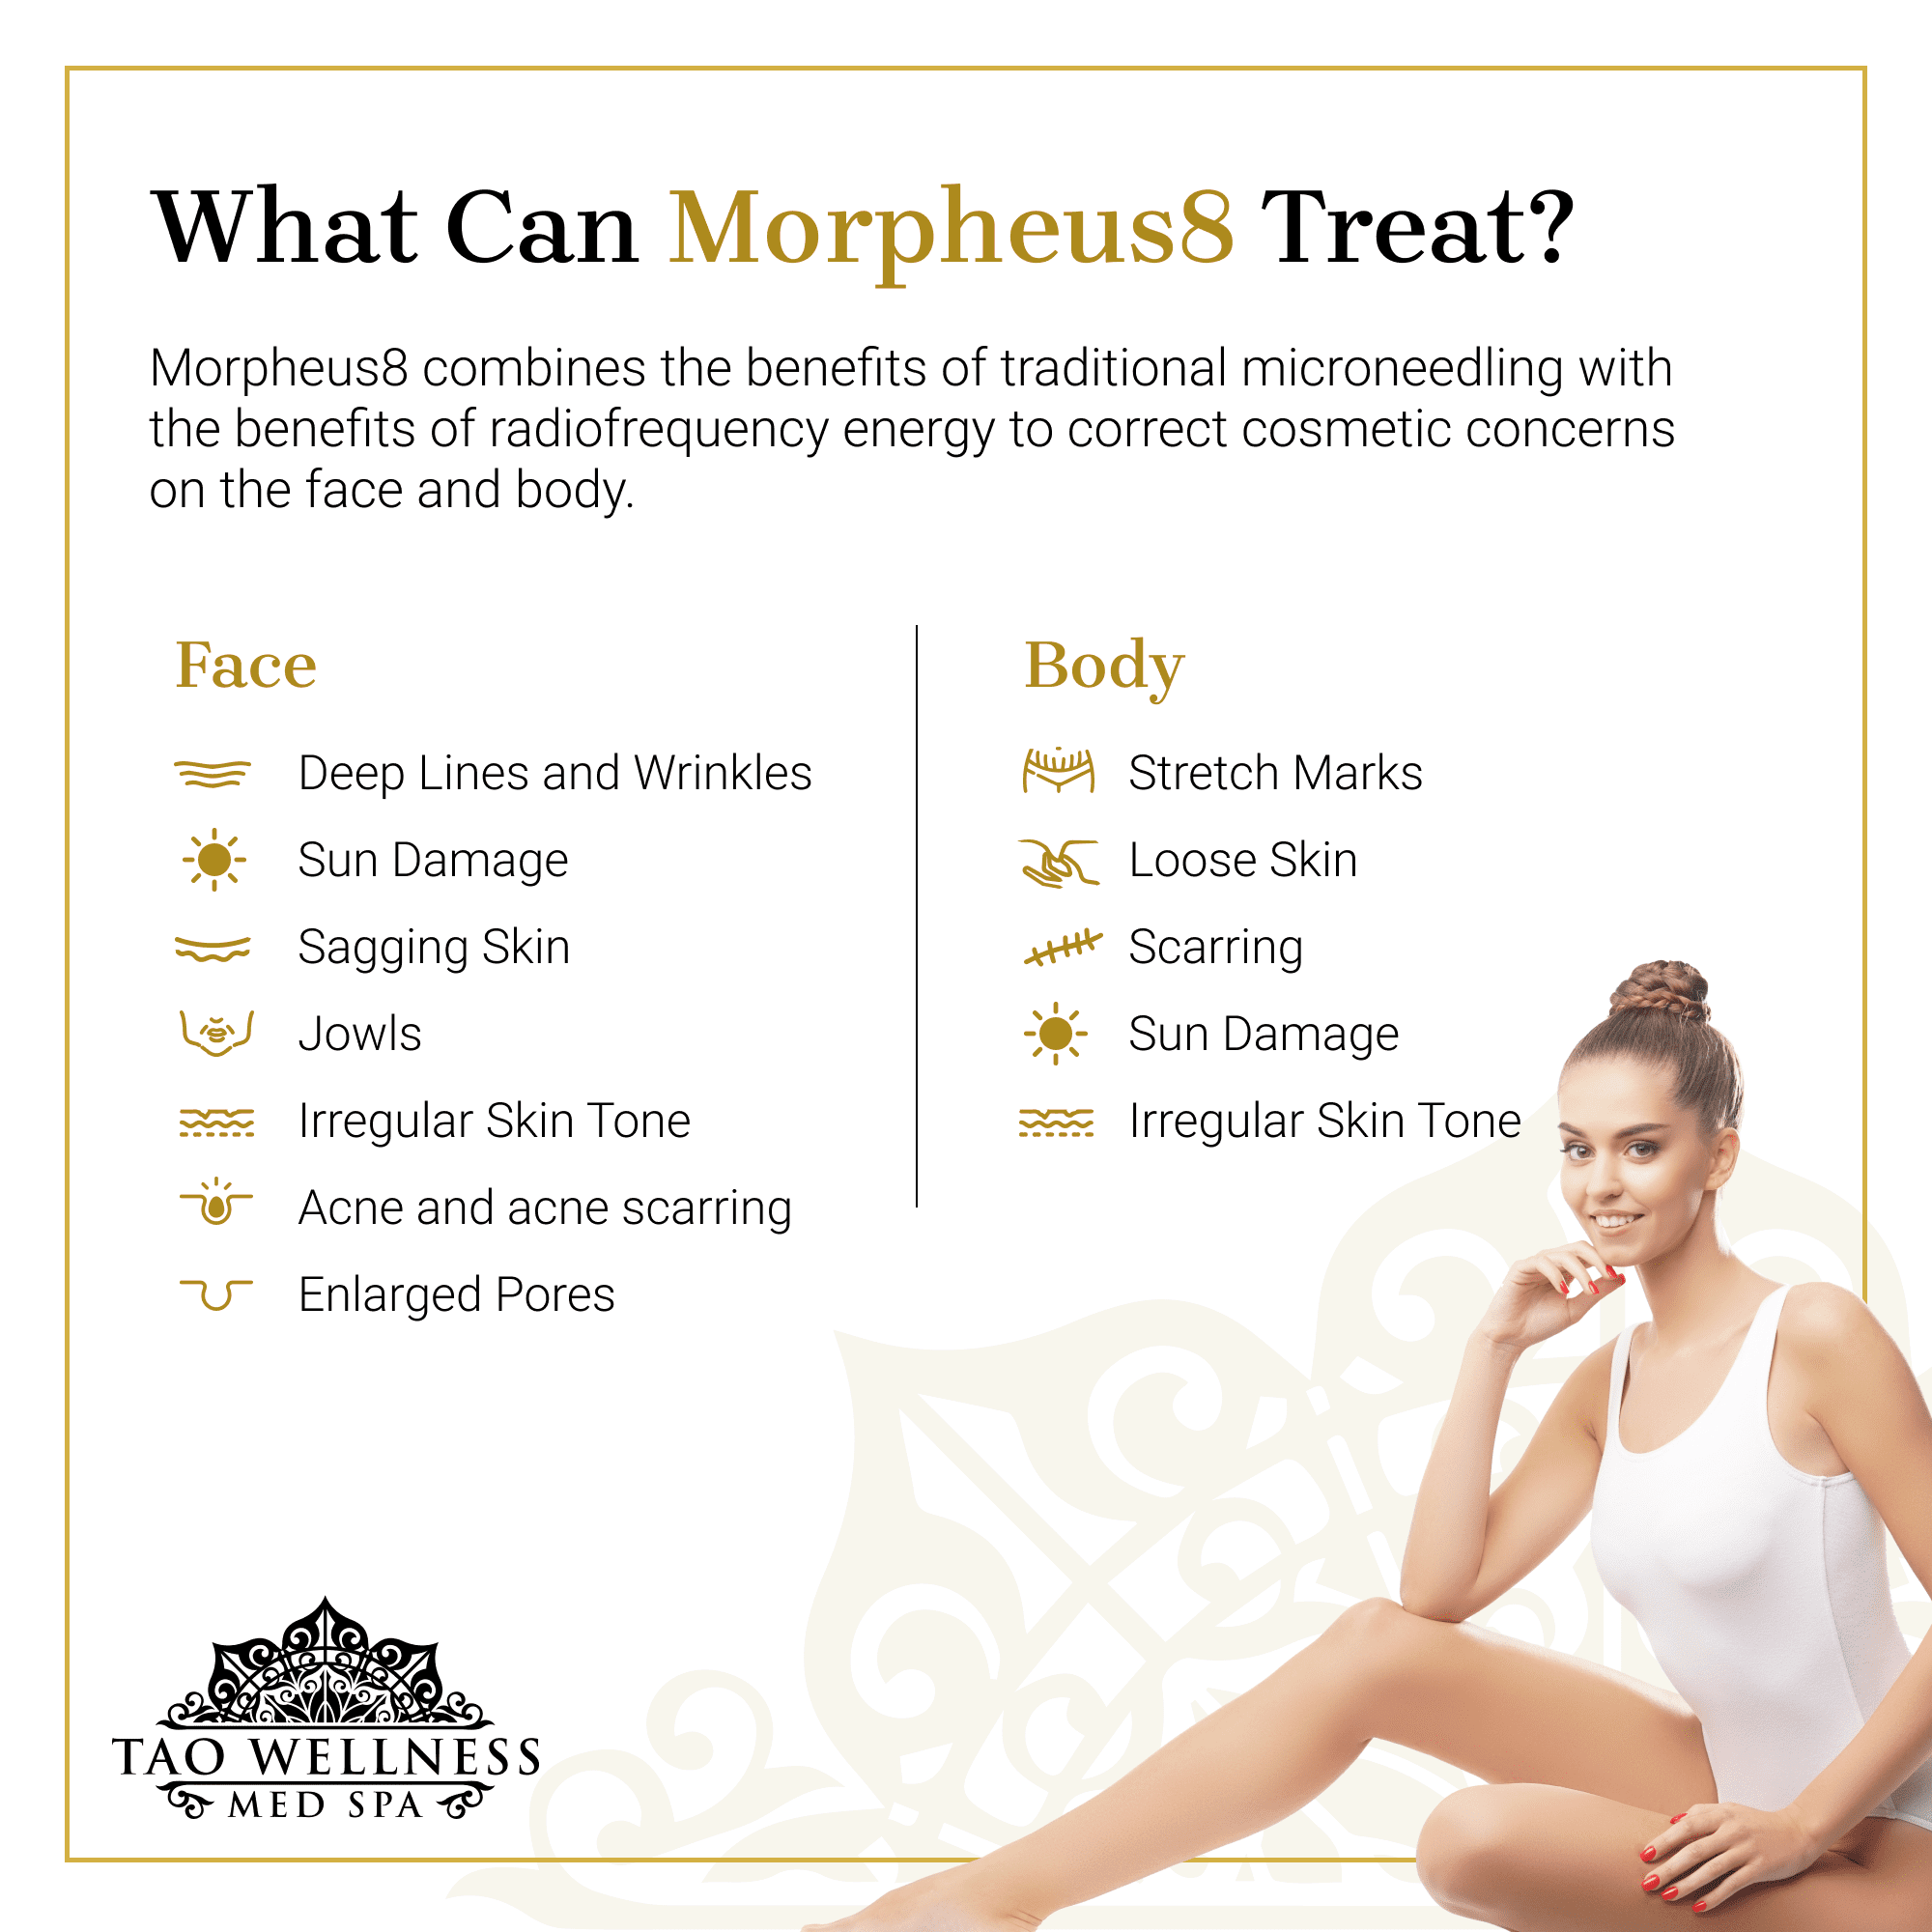 What Can Morpheus8 Treat?